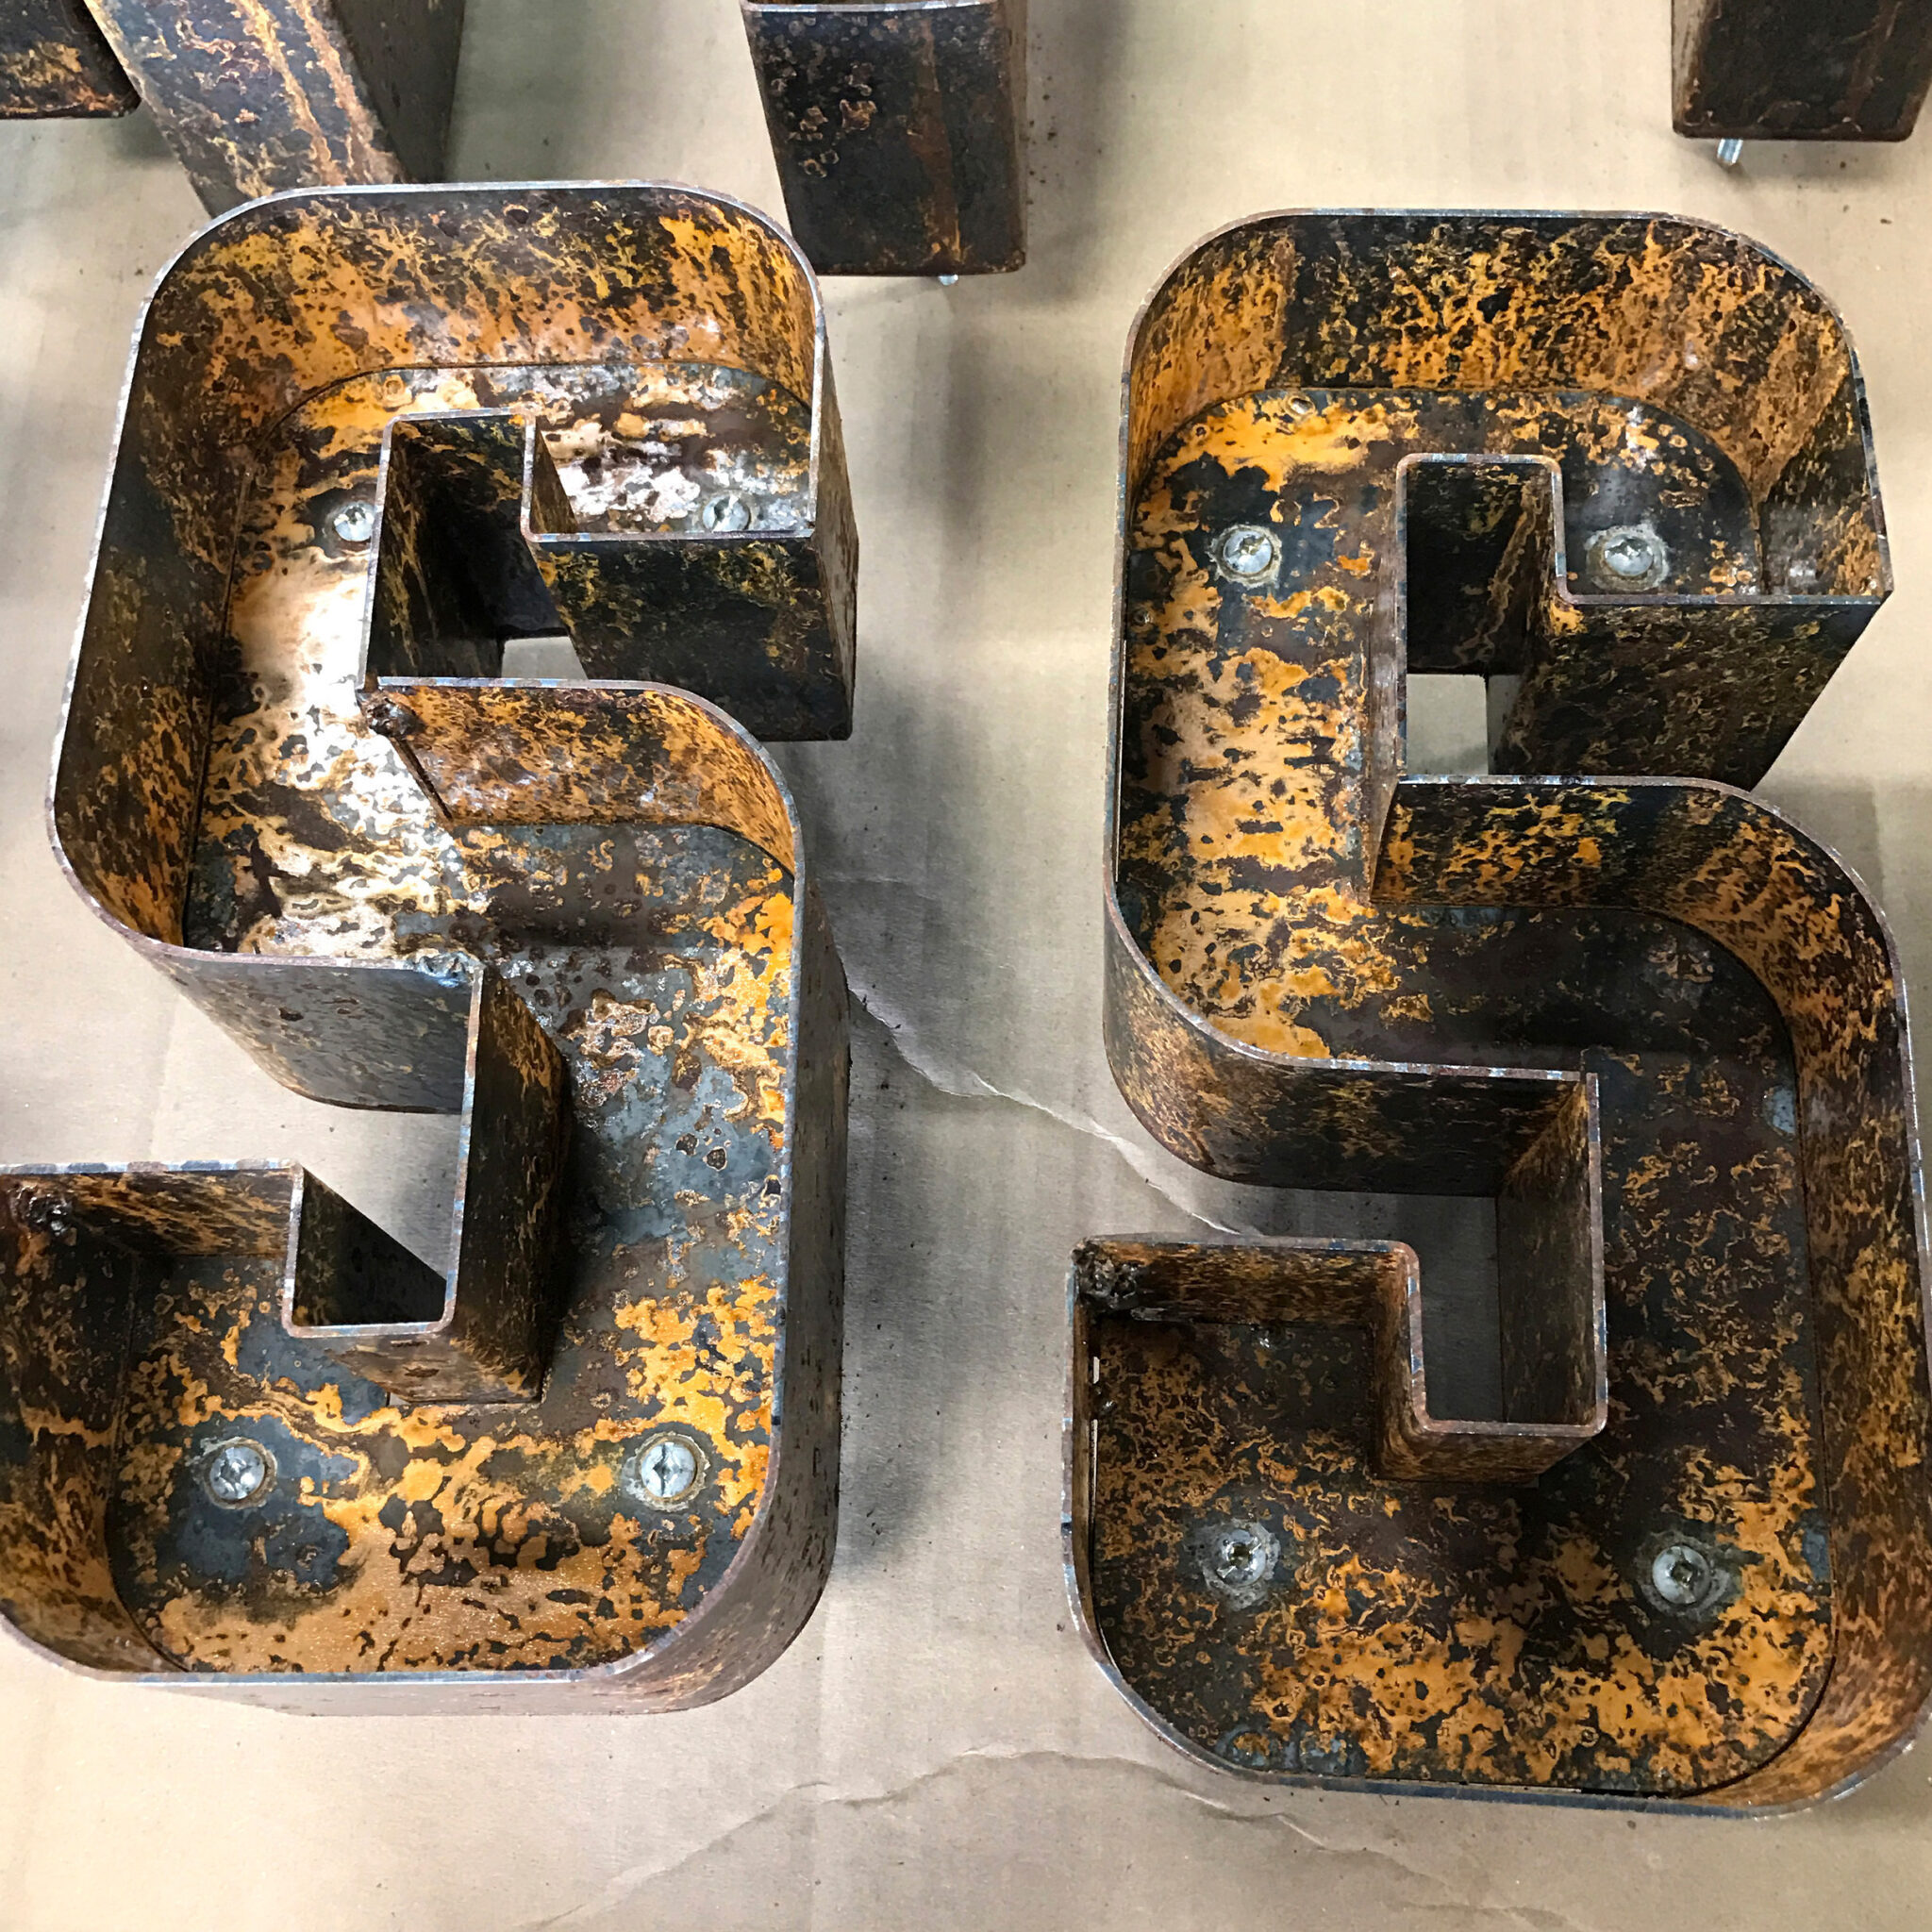 2 Rusted metal letters that say "SS".